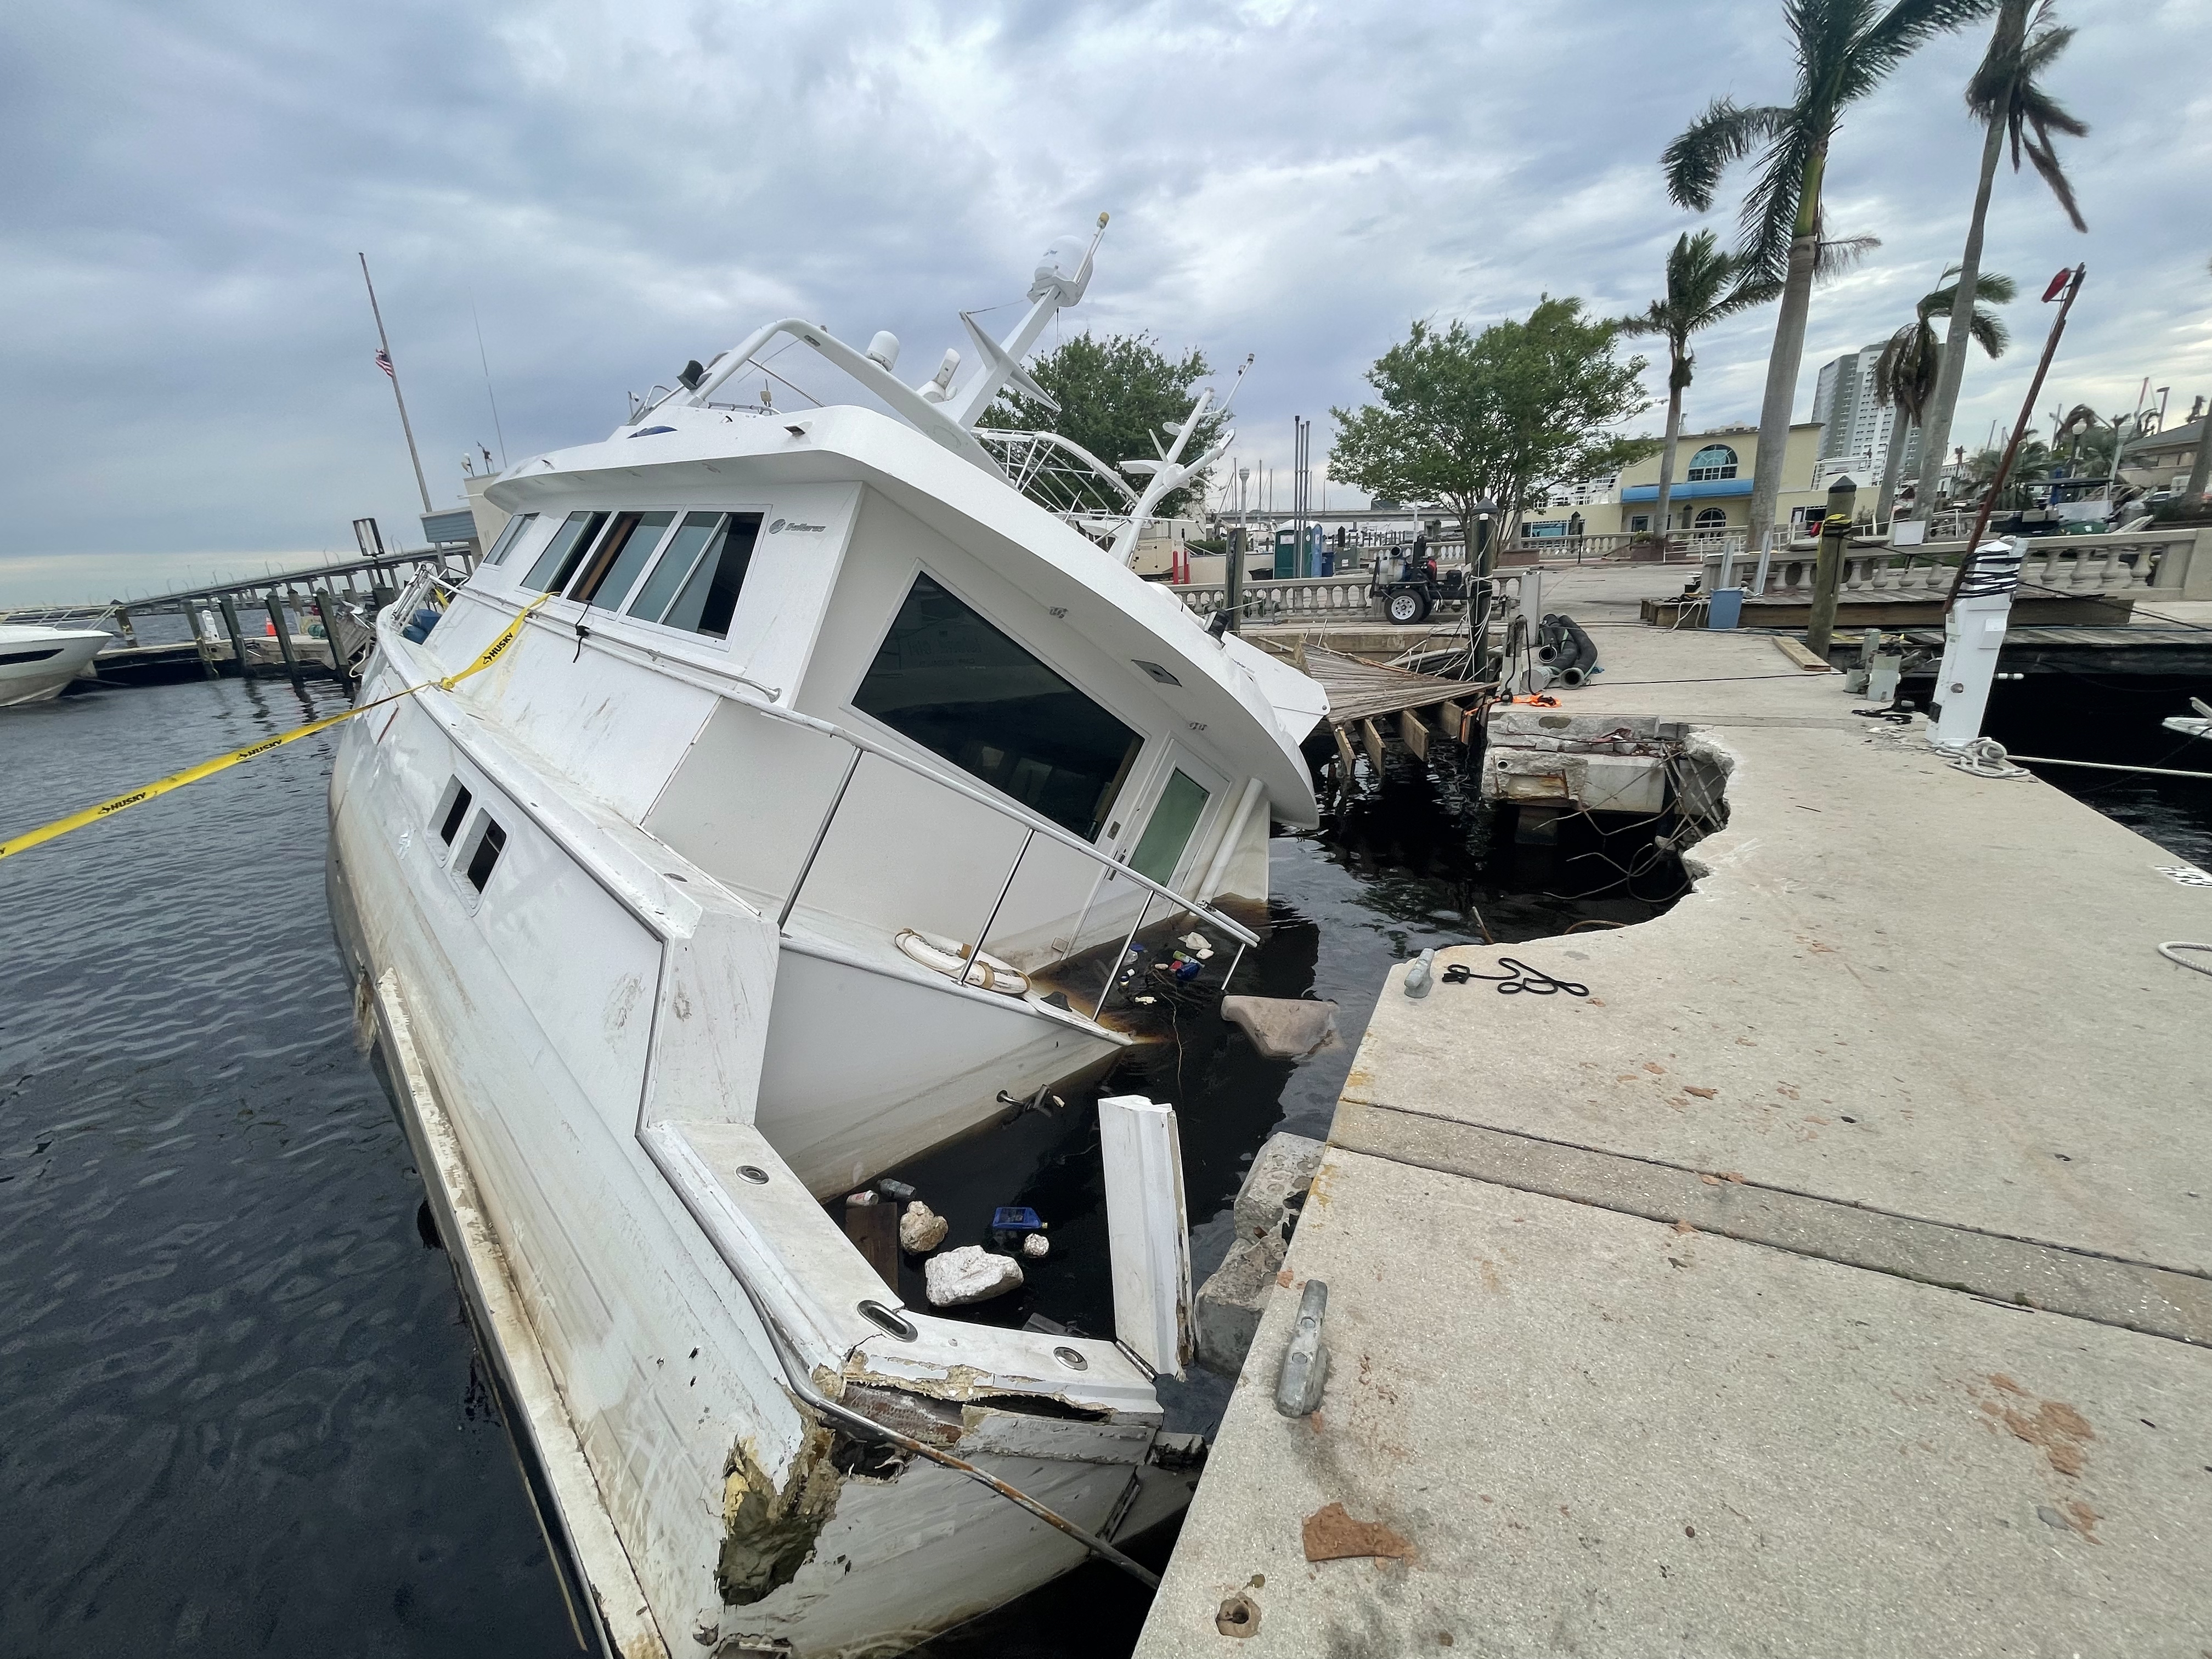 A half sunken abandoned derelict vessel that crashed into a marina walkway marked off with caution tape.